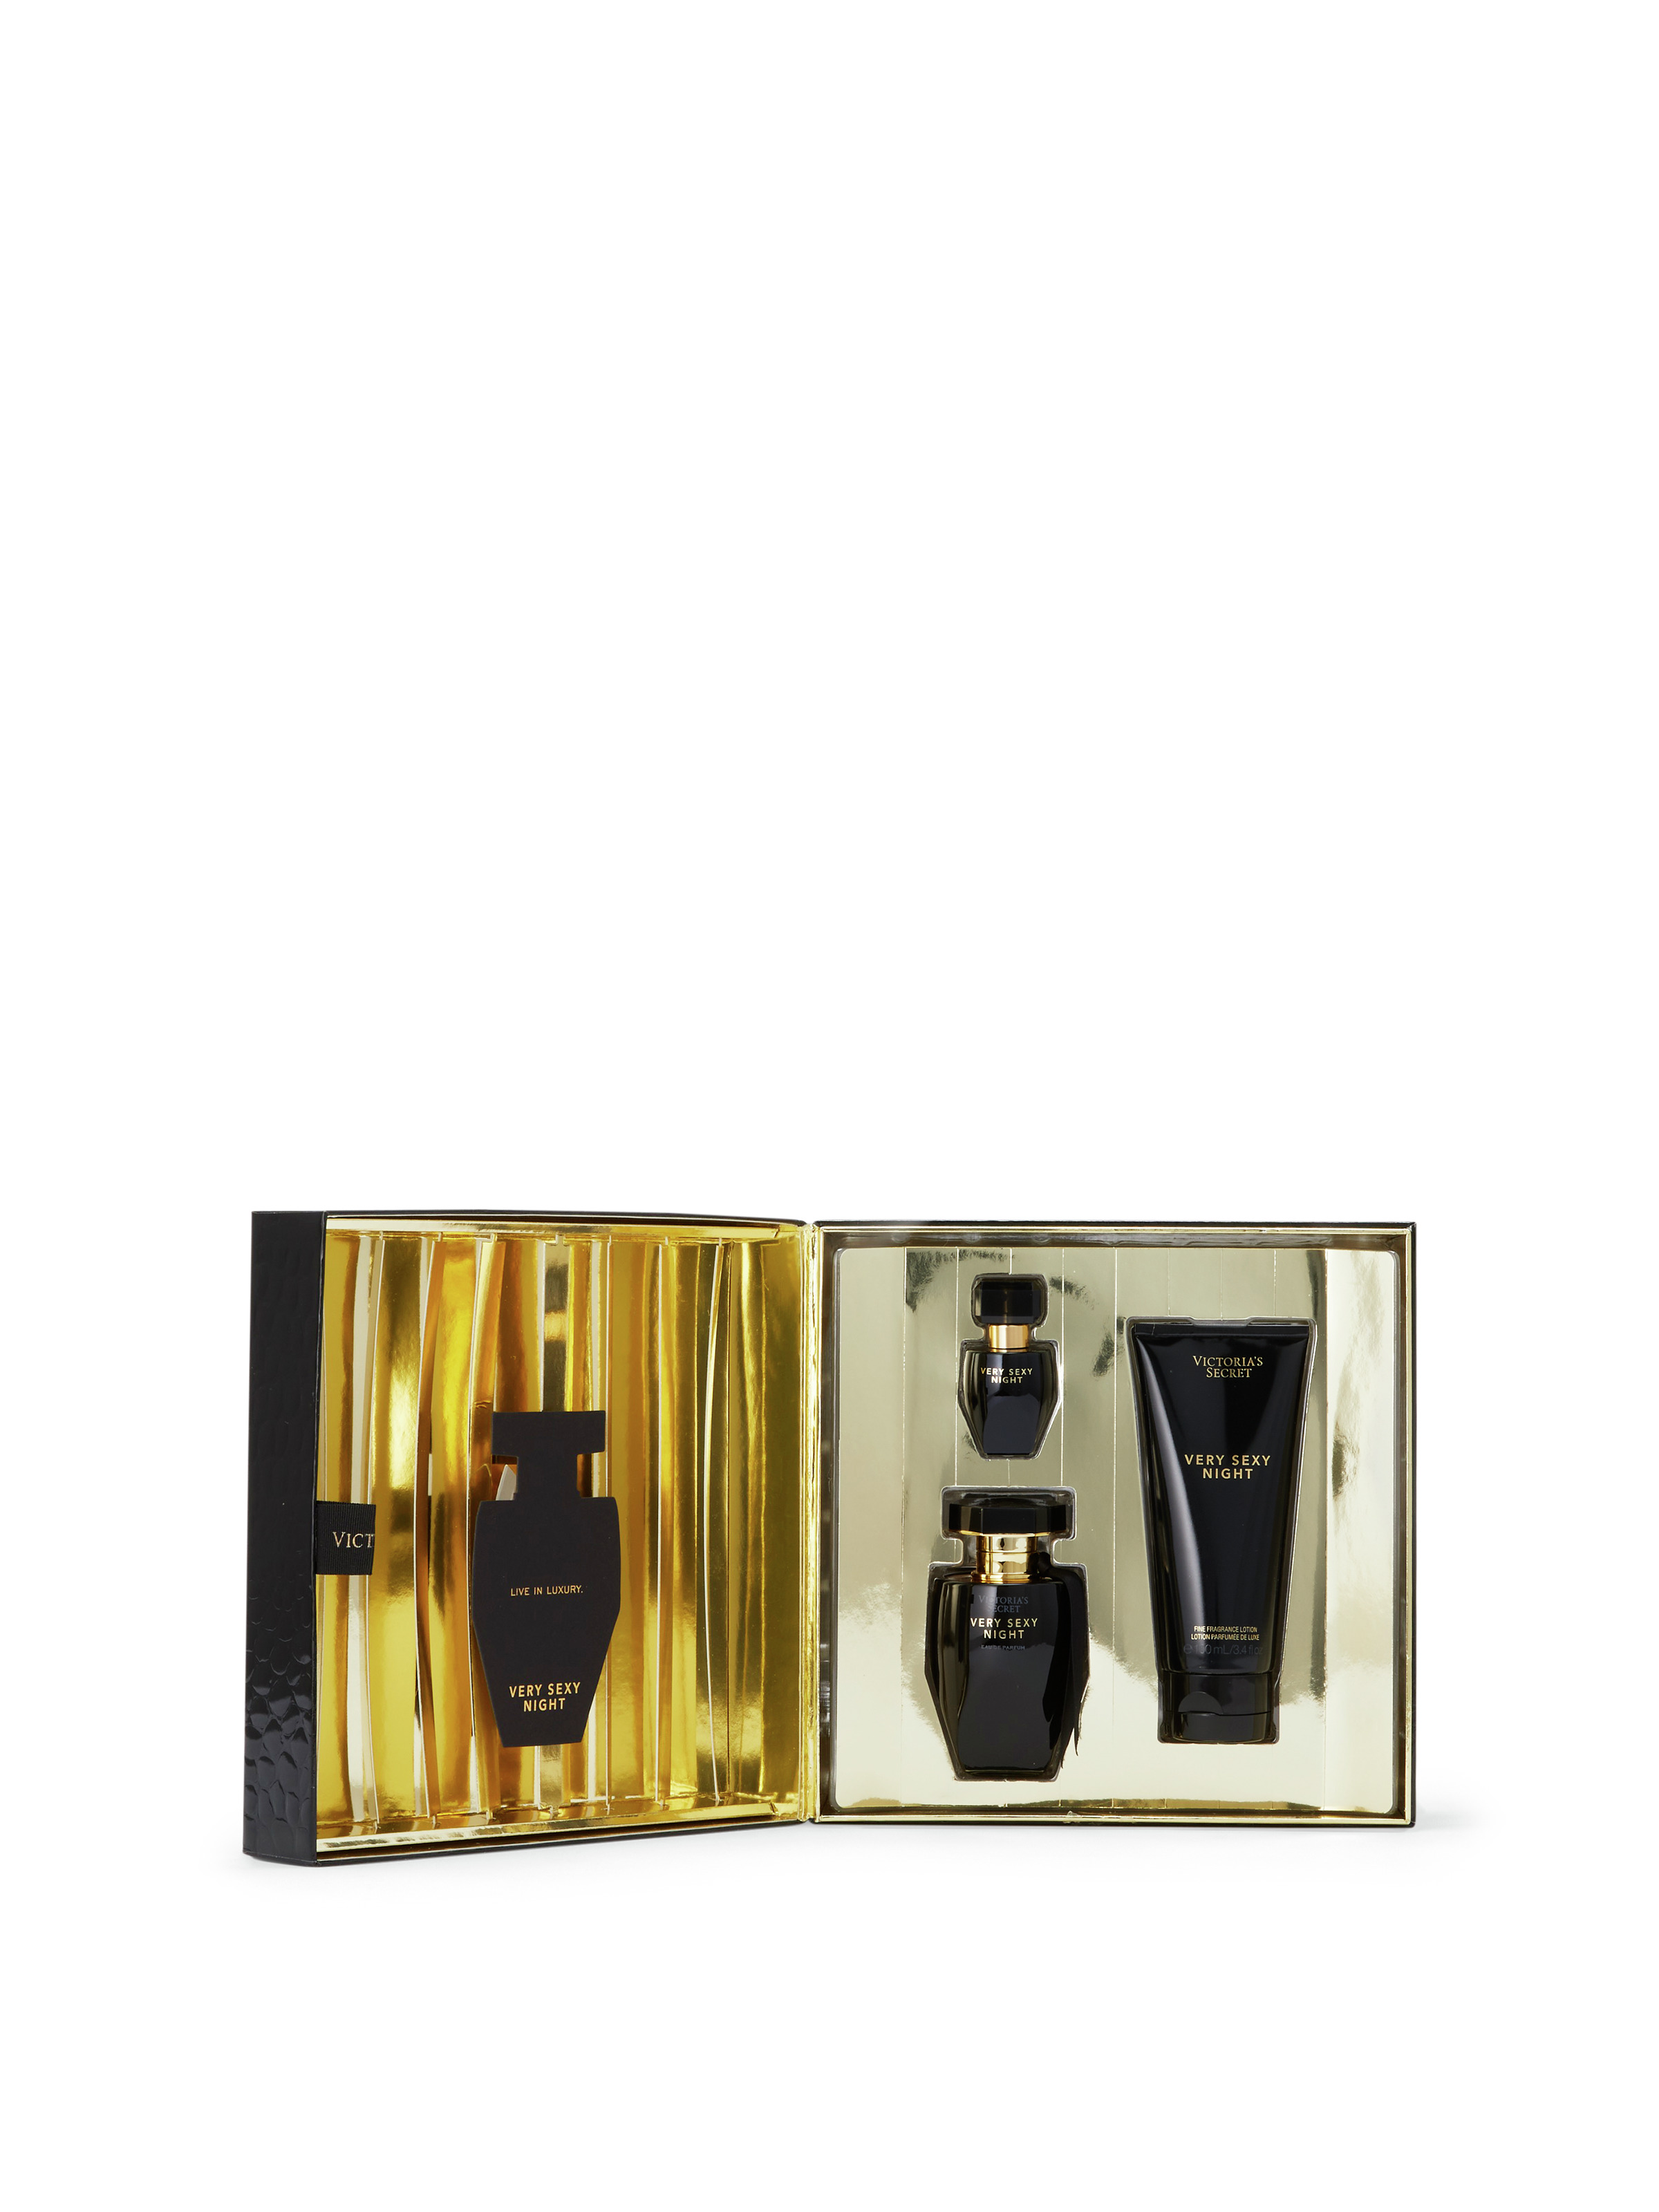 Very Sexy Night 3 Piece Giftset image number null